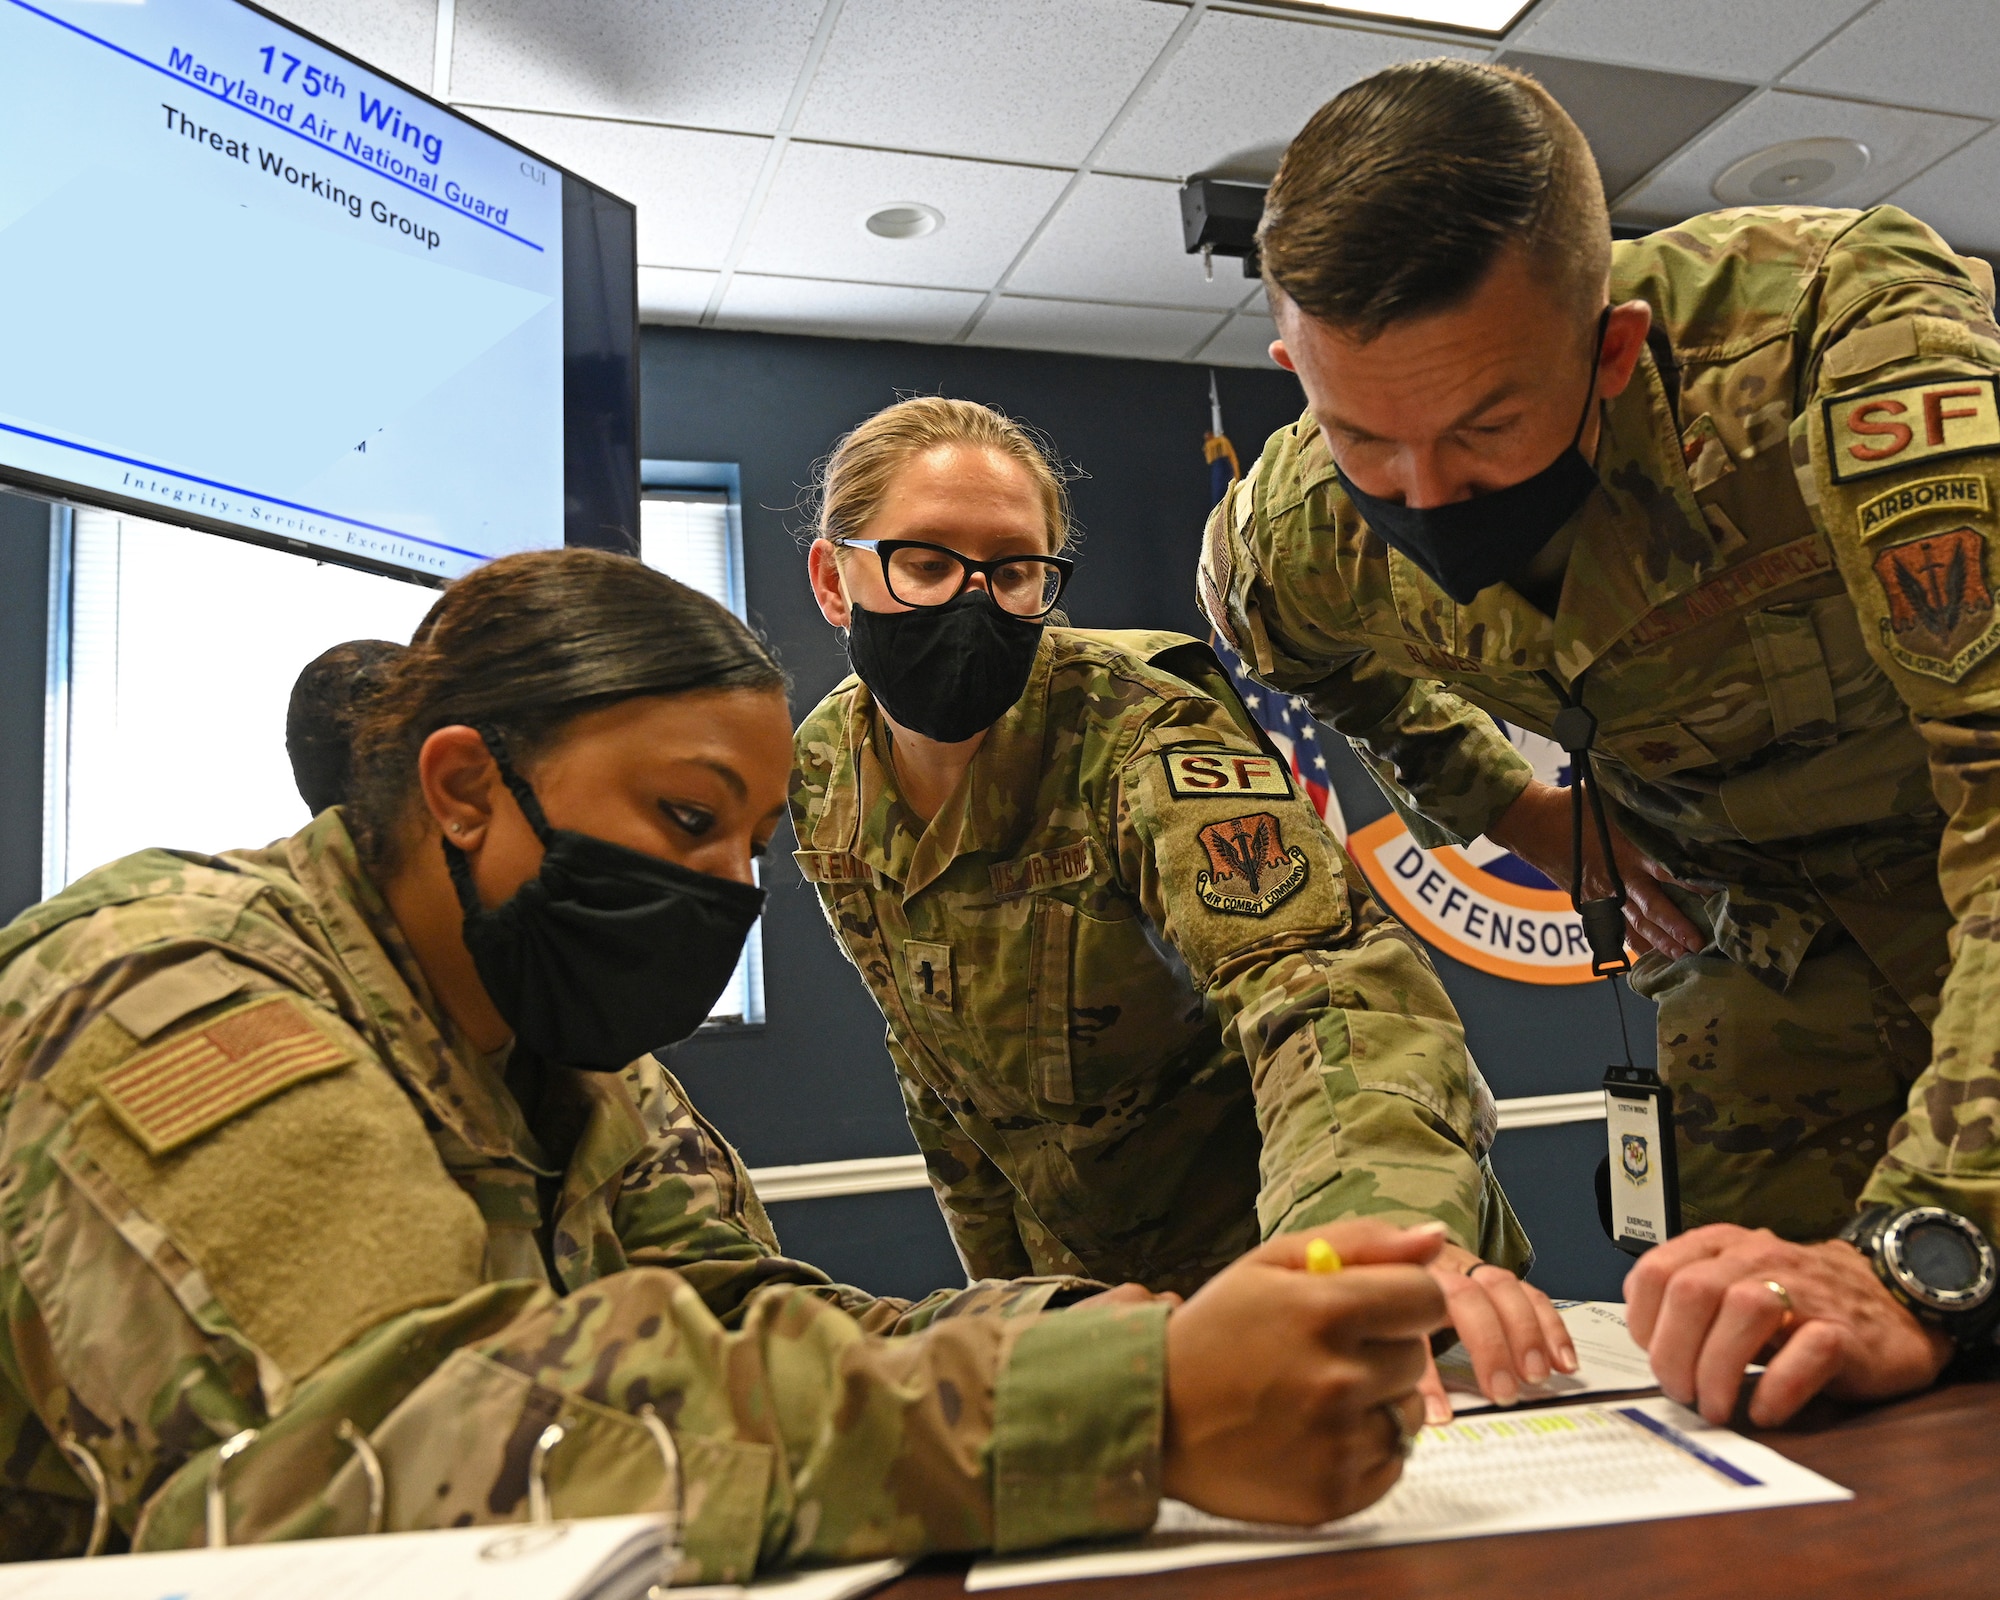 U.S. Air Force Master Sgt. Desiree Hayes (left), 175th Wing anti-terrorism program mananger, and U.S. Air Force 1st Lt. Allison Fleming (middle), 175th Wing anti-terrorism officer, discuss the details of an active shooter exercise scenario with U.S. Air Force Maj. Zachary Blades (right), 175th Security Forces Squadron commander, during an active shooter exercise at Warfield Air National Guard Base at Martin State Airport, Middle River, Md., August 26, 2021.